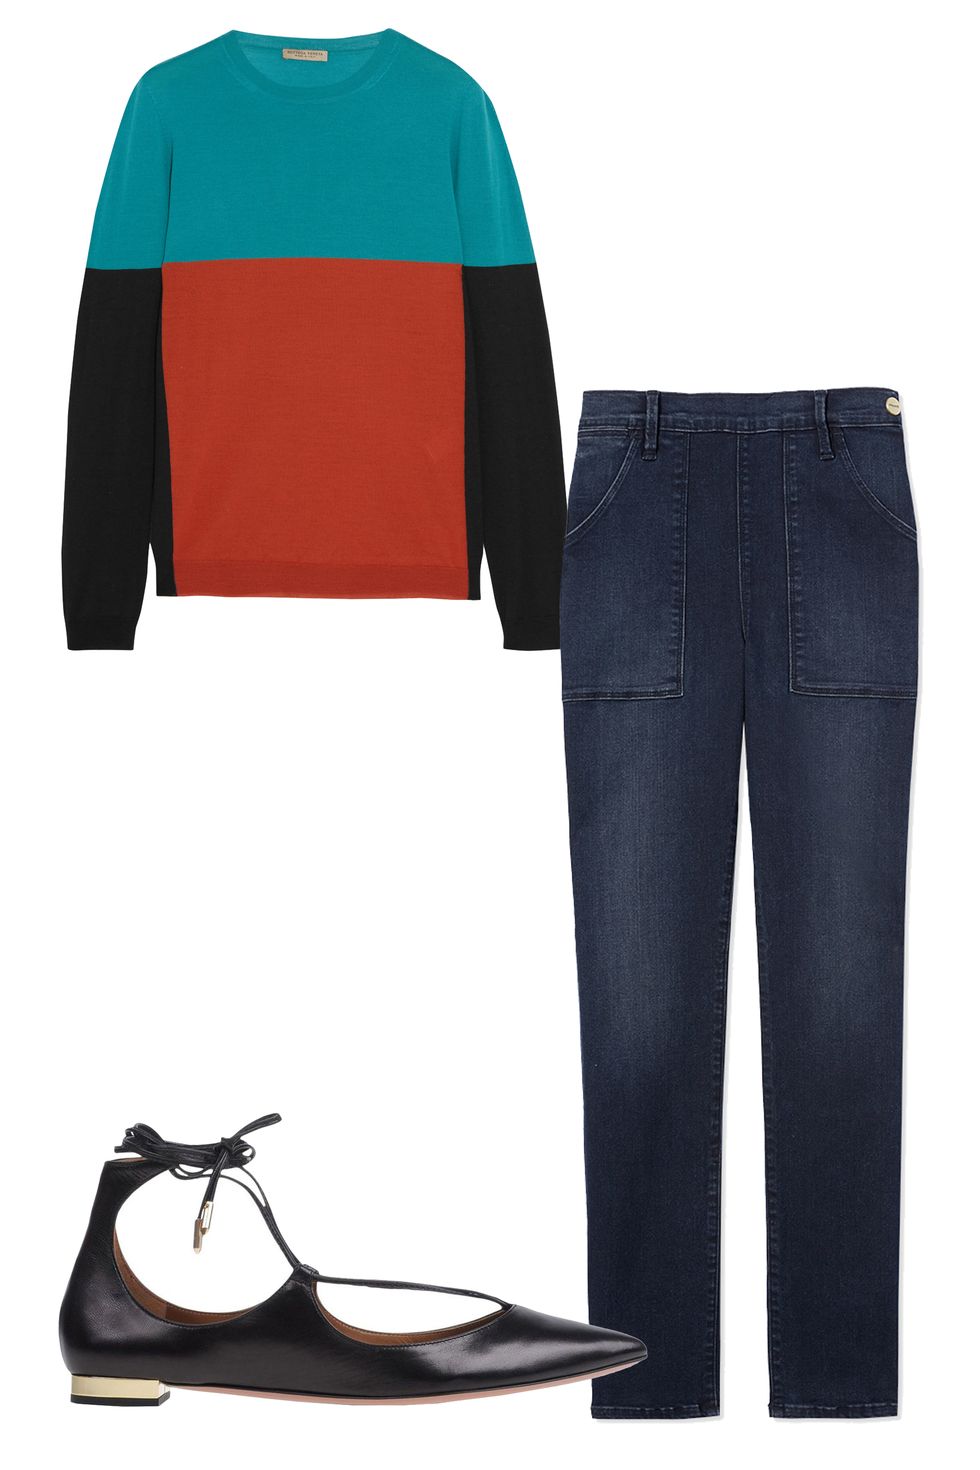 <p>Opt for dark denim with a bit of stretch for maximum comfort and style, then pack a lightweight cozy sweater and a chic pair of flats. Bonus: you can repeat this look for brunch. <em>Bottega Veneta Color-Block Merino Wool Sweater, $1,100,<strong> </strong><a href="https://www.net-a-porter.com/us/en/product/637834" target="_blank"><strong>netaporter.com</strong></a>; <em>Frame Le Skinny Francoise Jeans, $239, <a href="https://shop.harpersbazaar.com/designers/f/frame/le-skinny-de-francoise-7847.html" target="_blank"><strong>shopBAZAAR.com</strong></a>; </em></em><em>Aquazzura Black Tie Ballerina Flat, $675, <a href="https://shop.harpersBAZAAR.com/designers/a/aquazzura/black-ballerina-flat-7433.html" target="_blank"><strong>shopBAZAAR.com</strong></a>.</em></p><p><em></em><br></p><p><br></p><p><br></p>